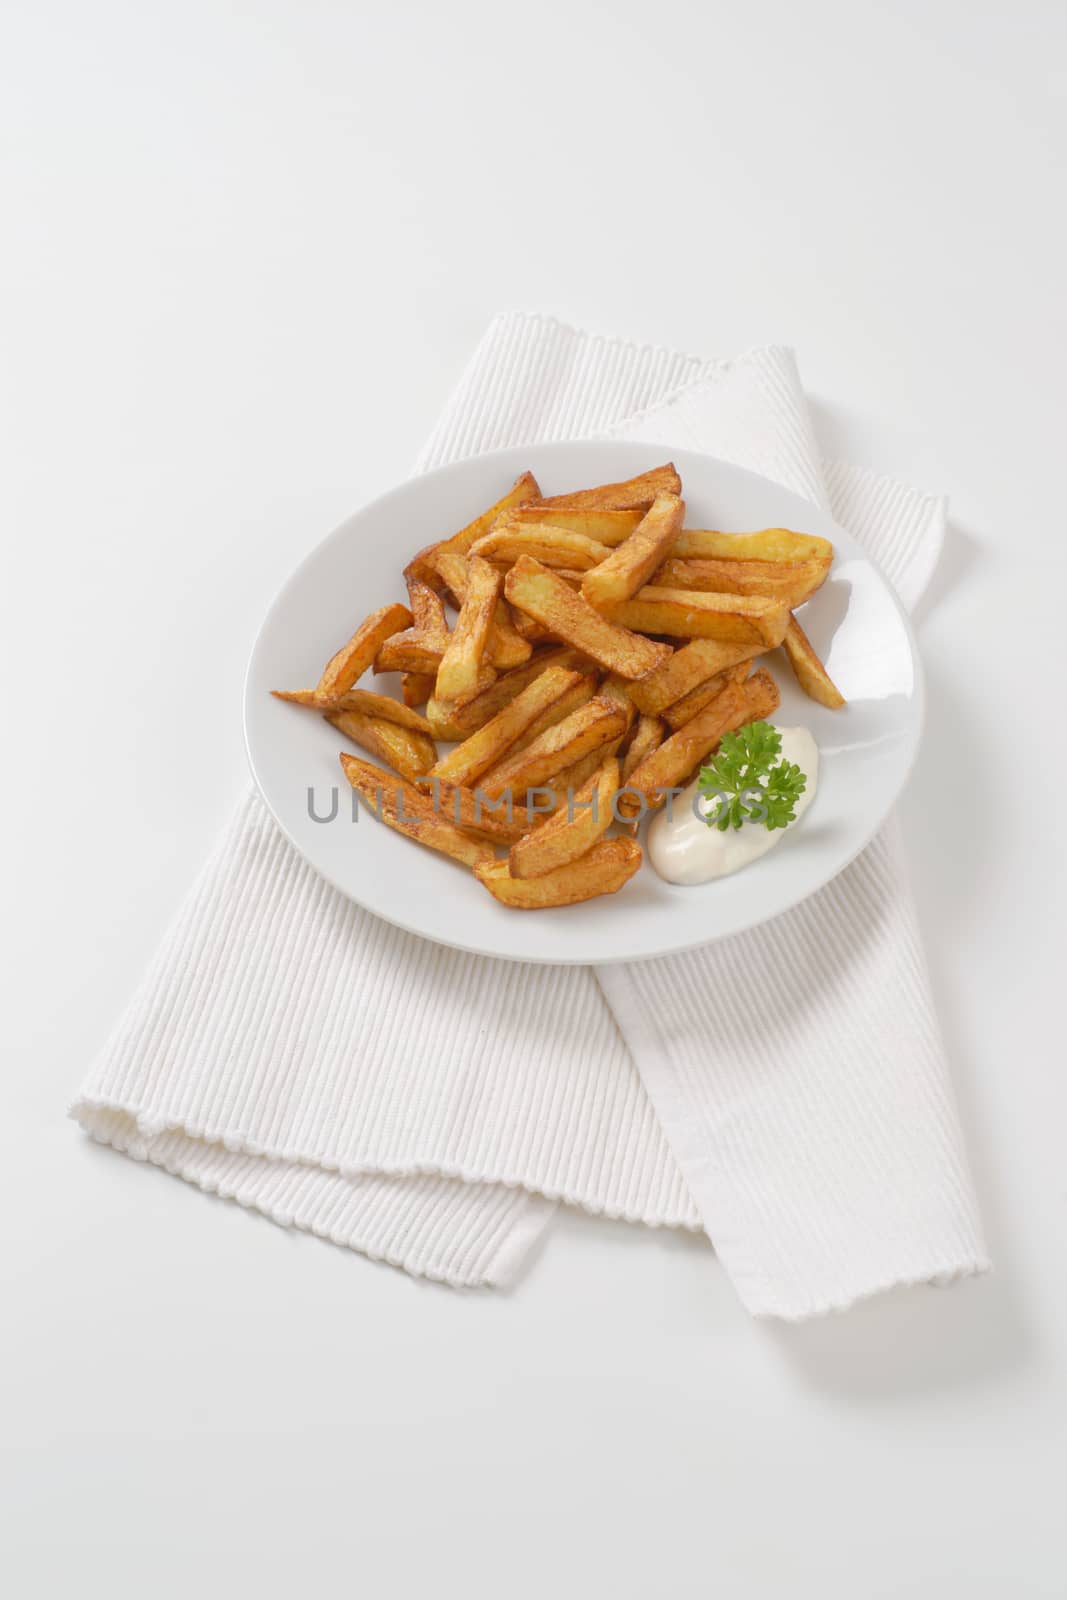 plate of chipped potatoes with mayonnaise on white place mat